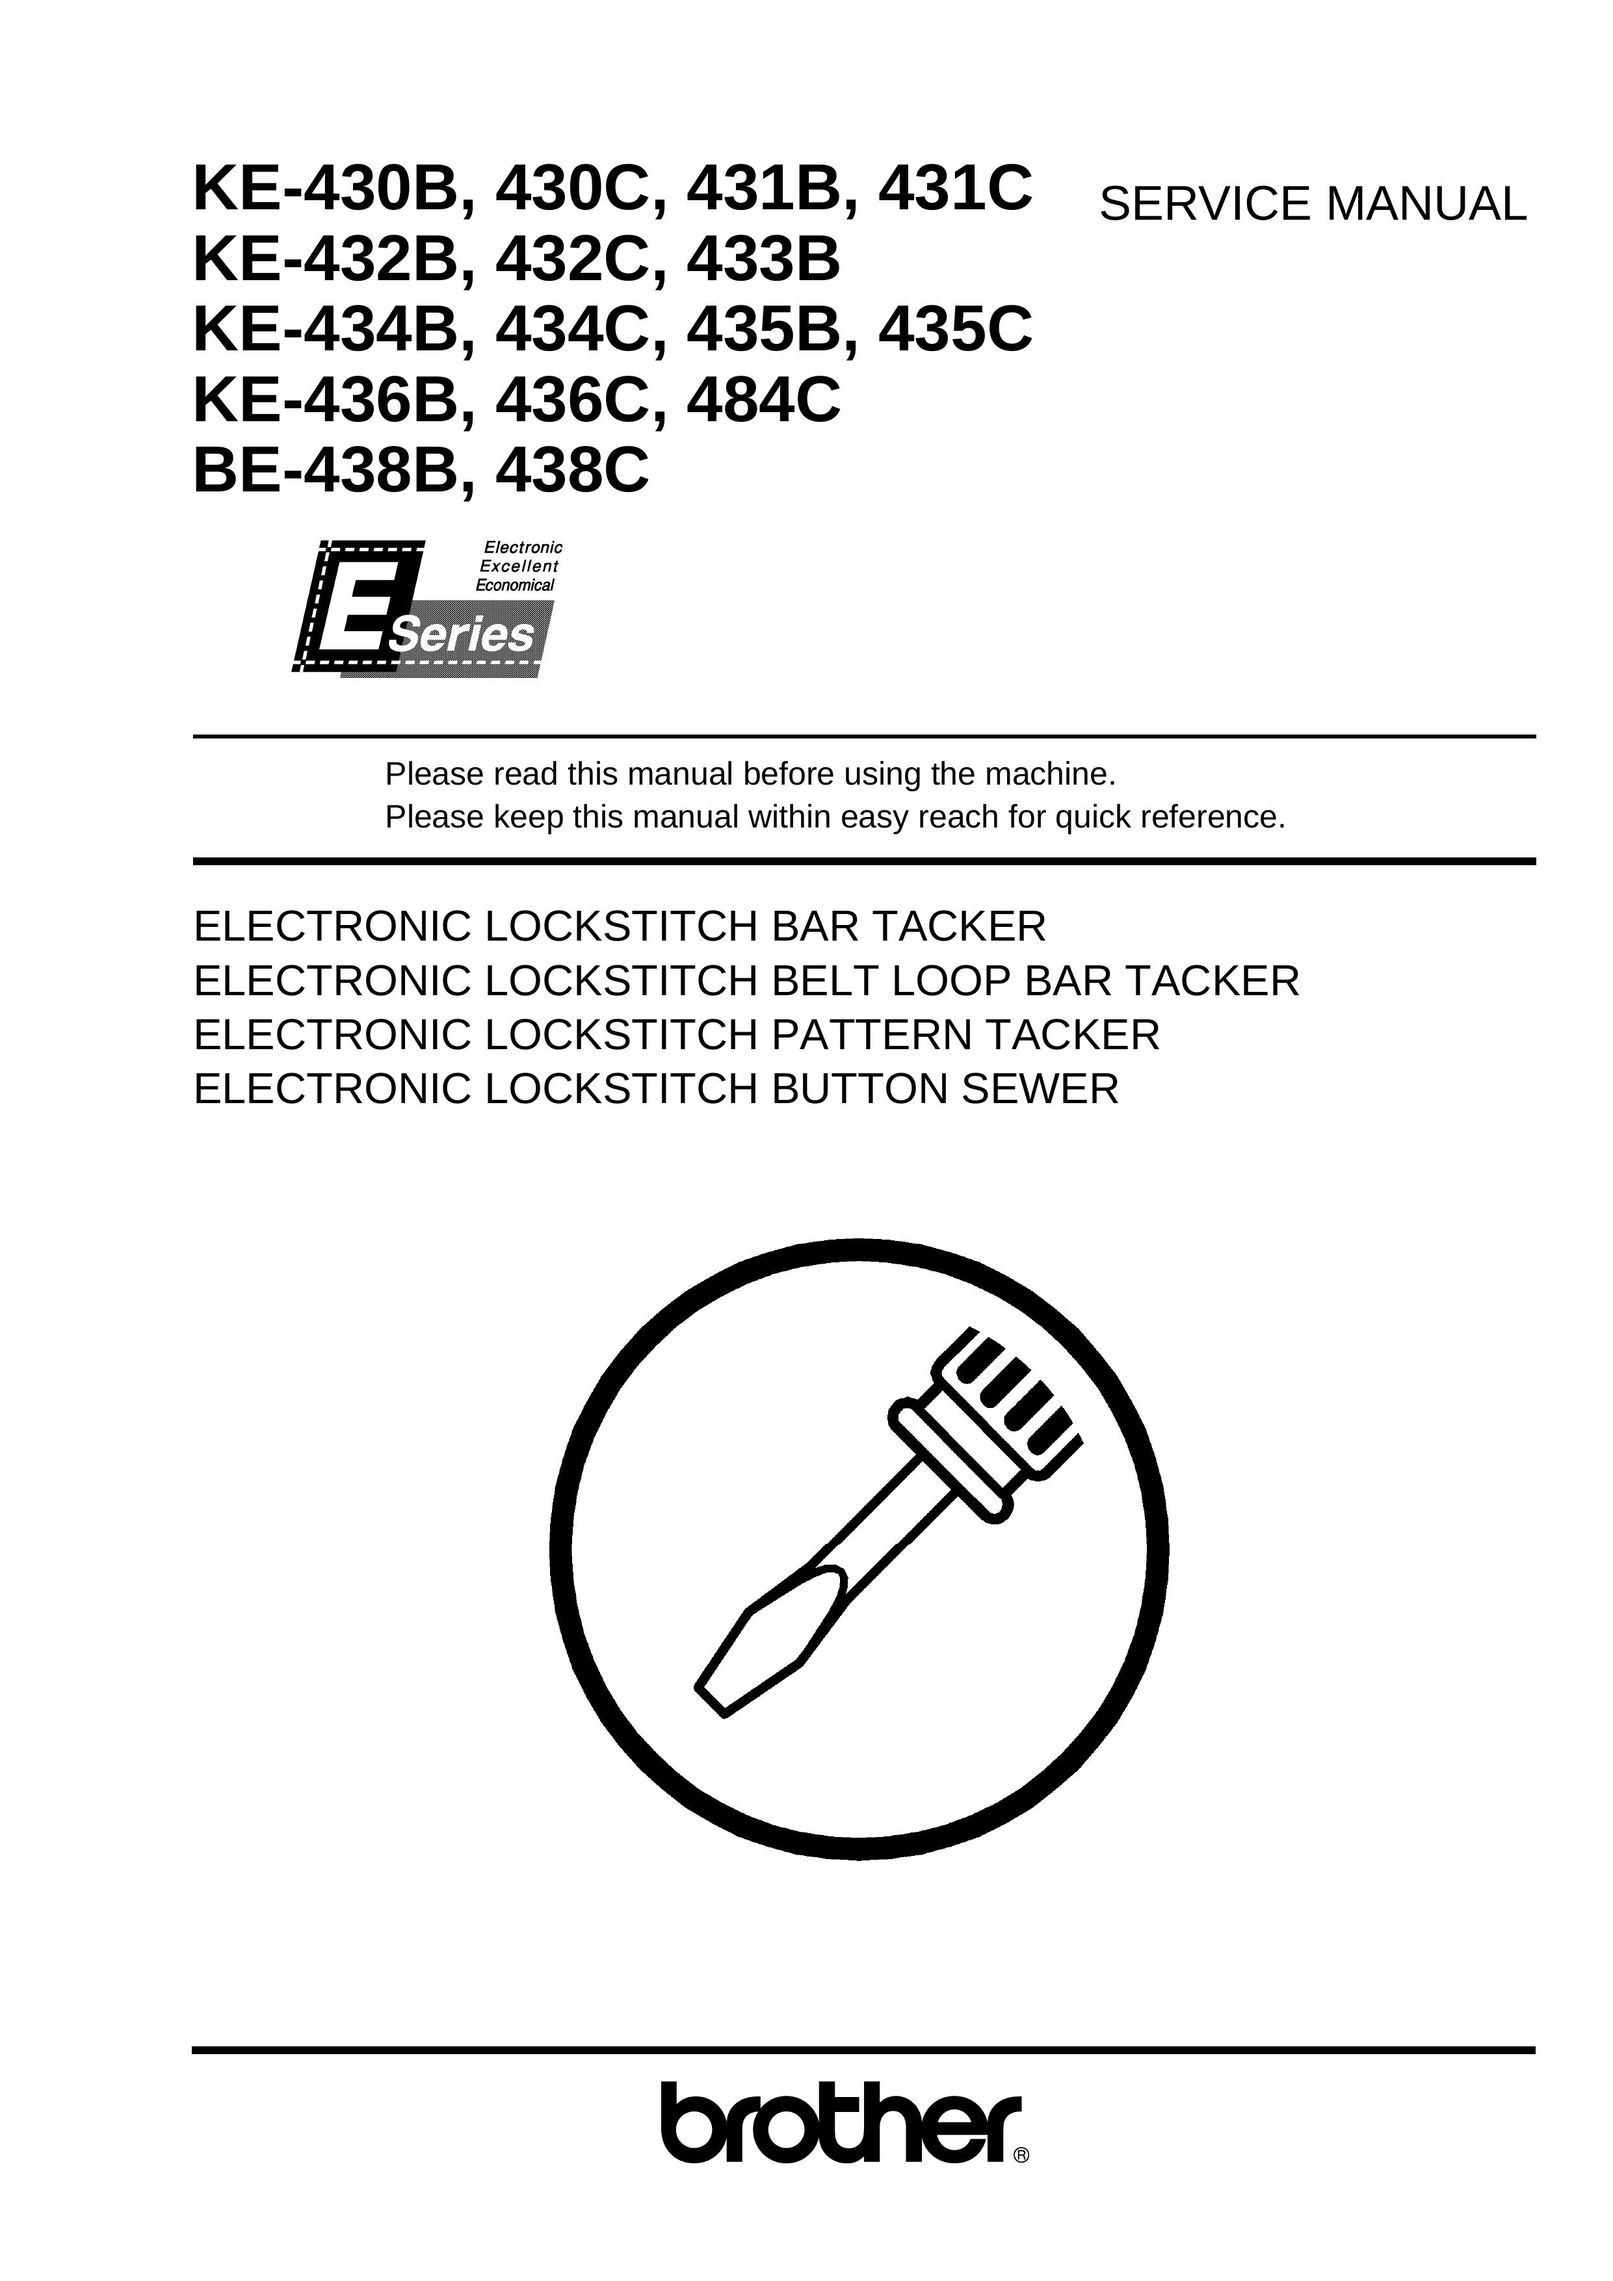 Brother 434C Sewing Machine User Manual